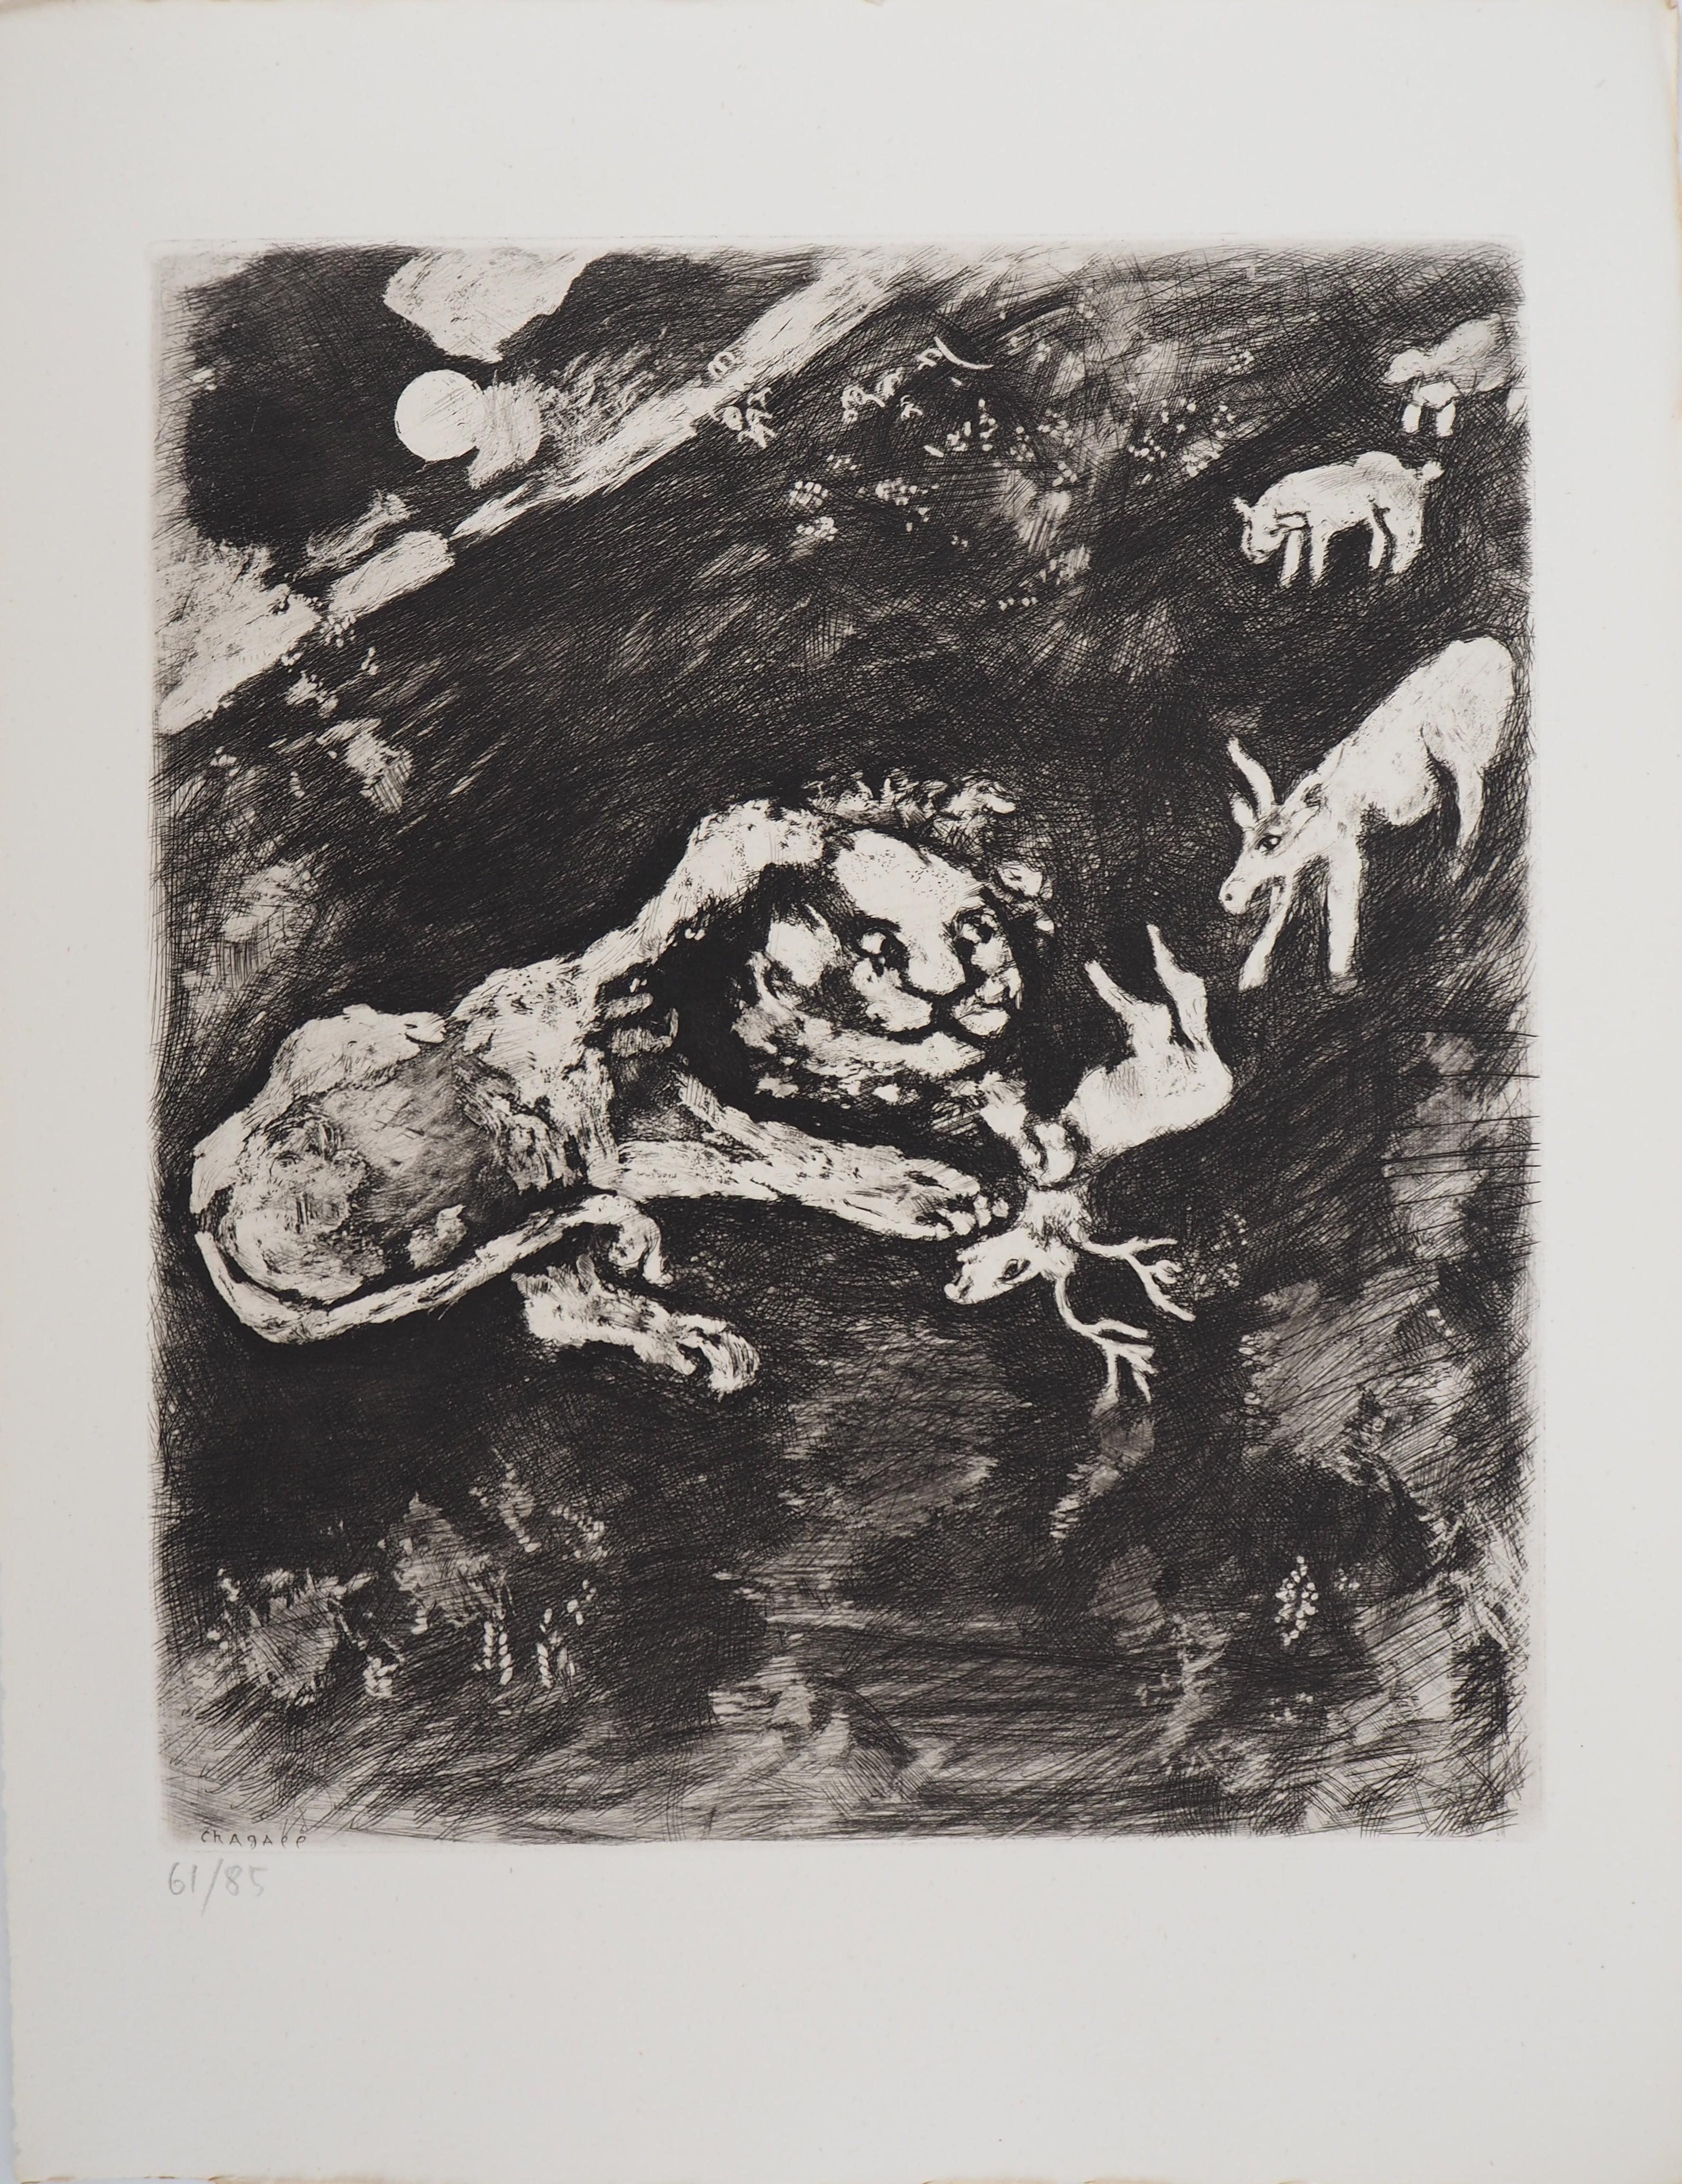 Marc Chagall Animal Print - The Goats and the Lion - Original Etching - Ref. Sorlier #198